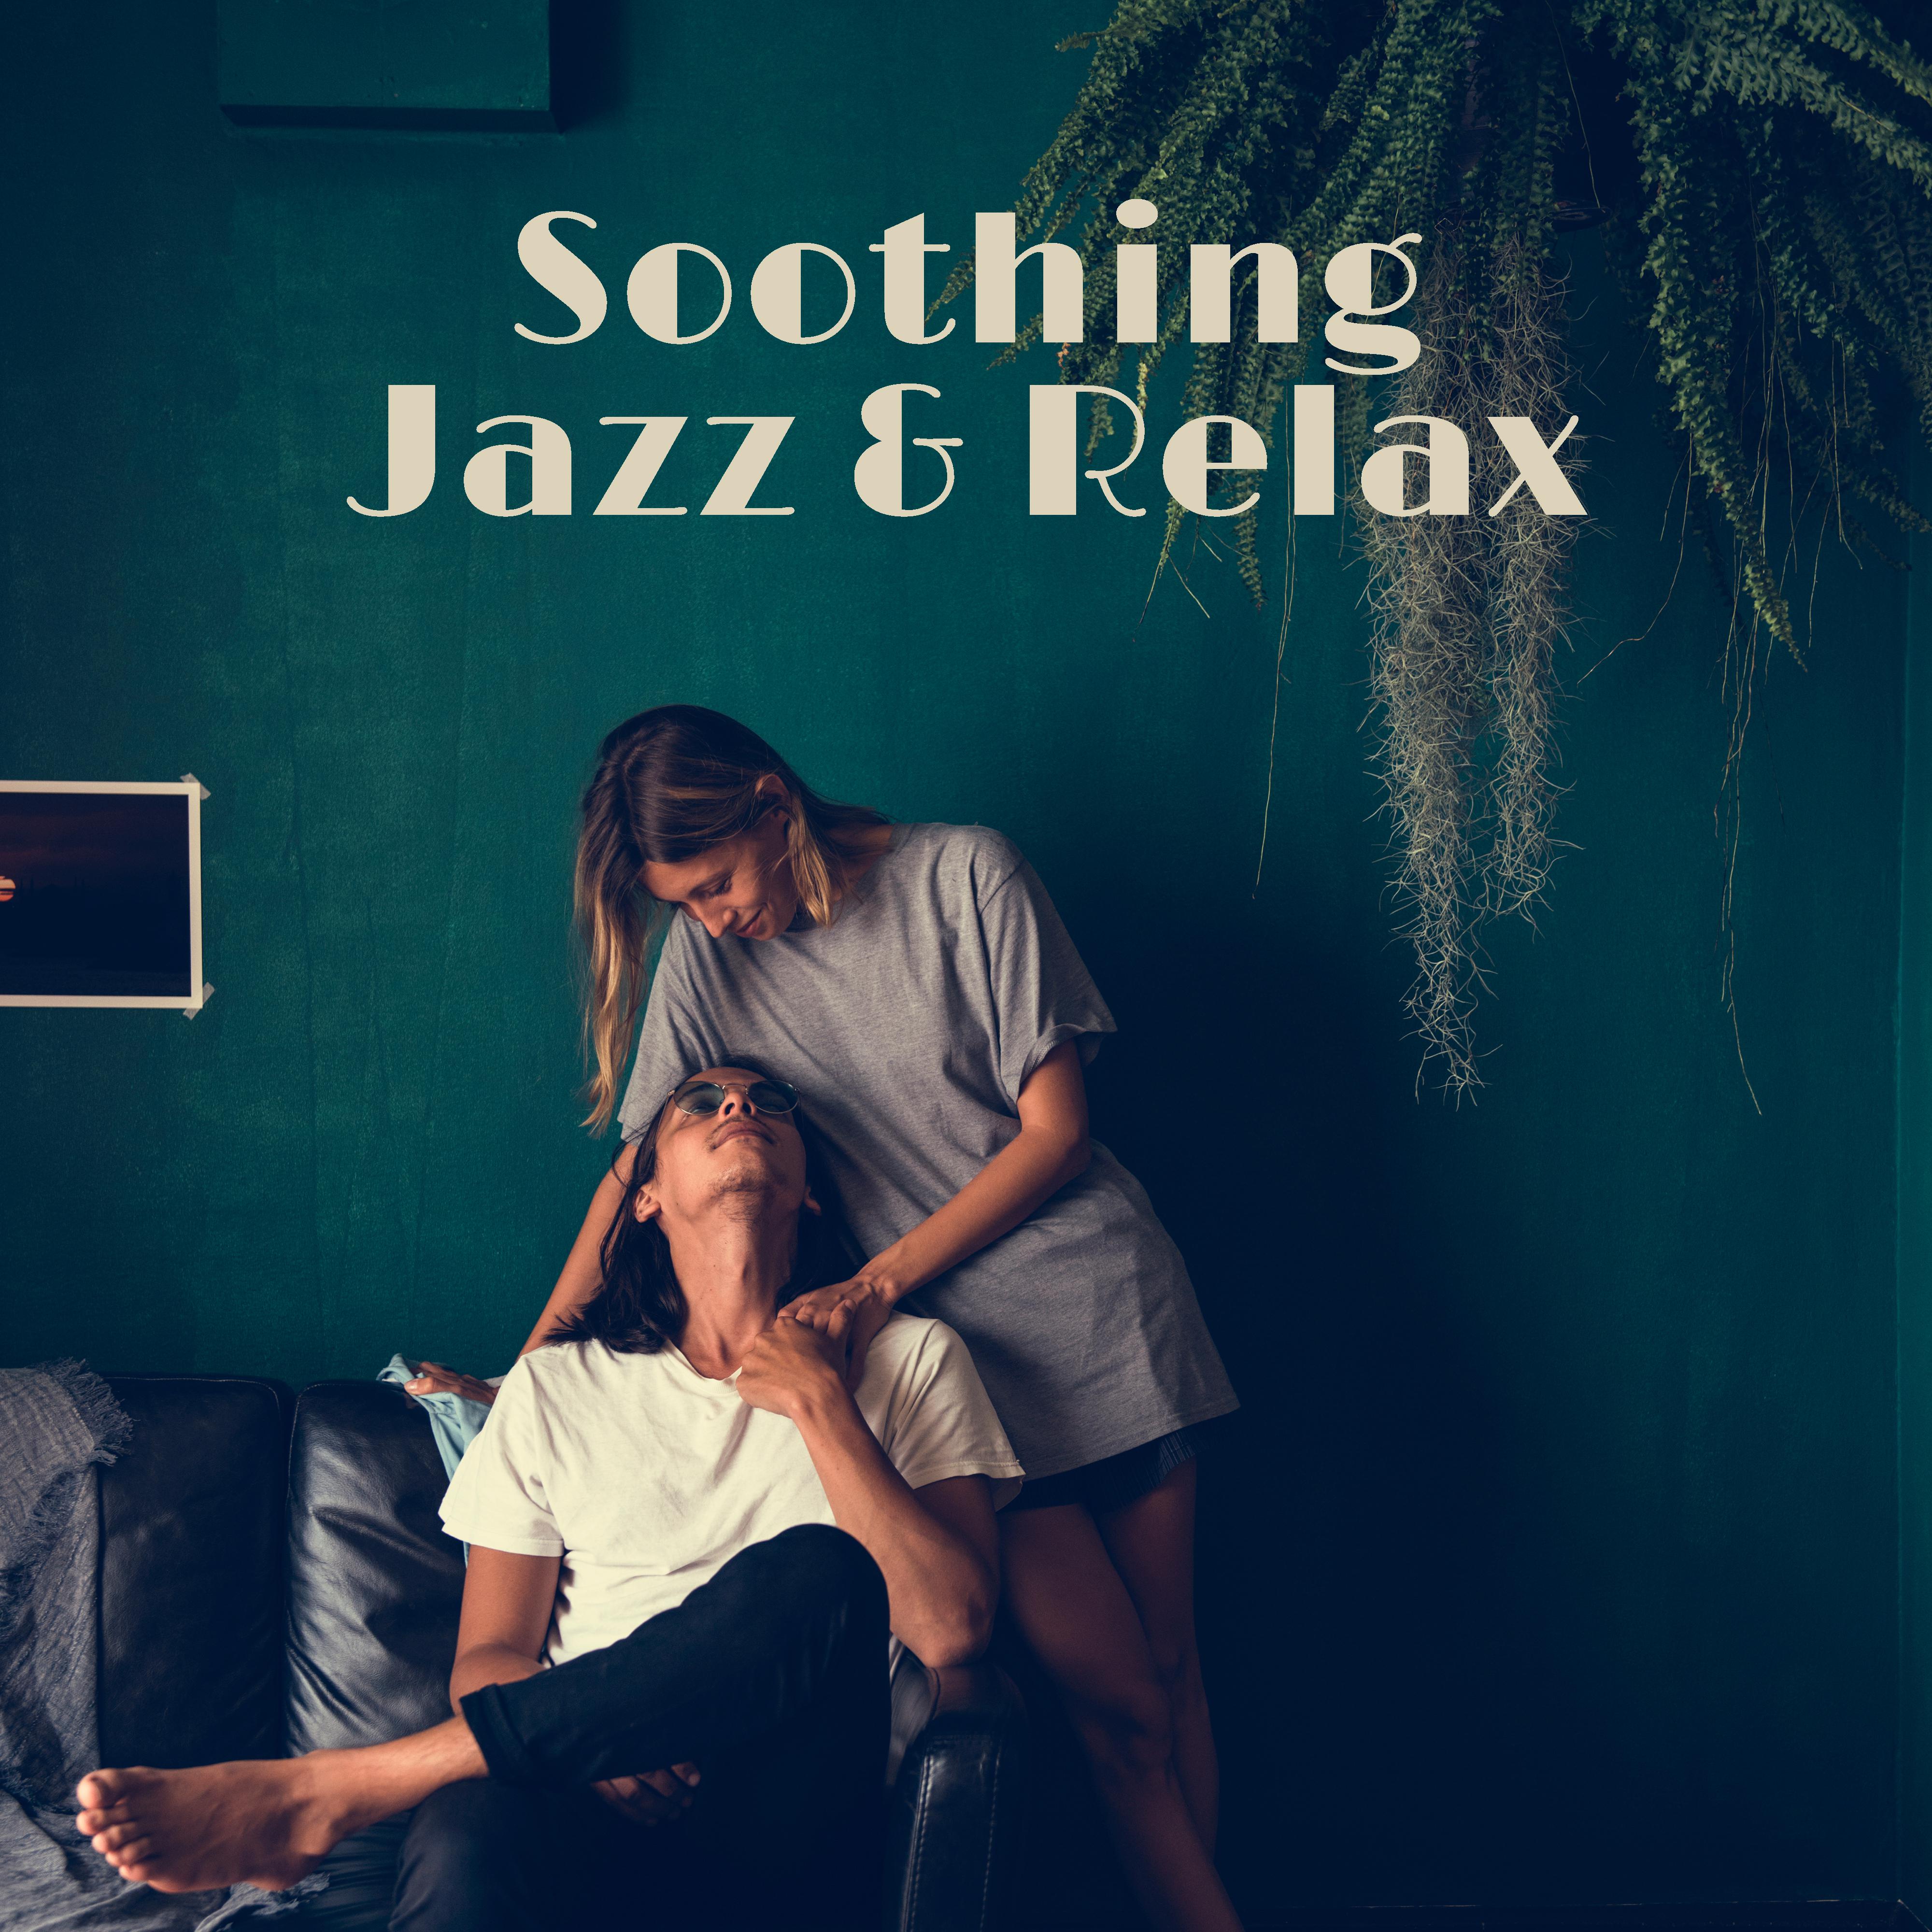 Soothing Jazz & Relax